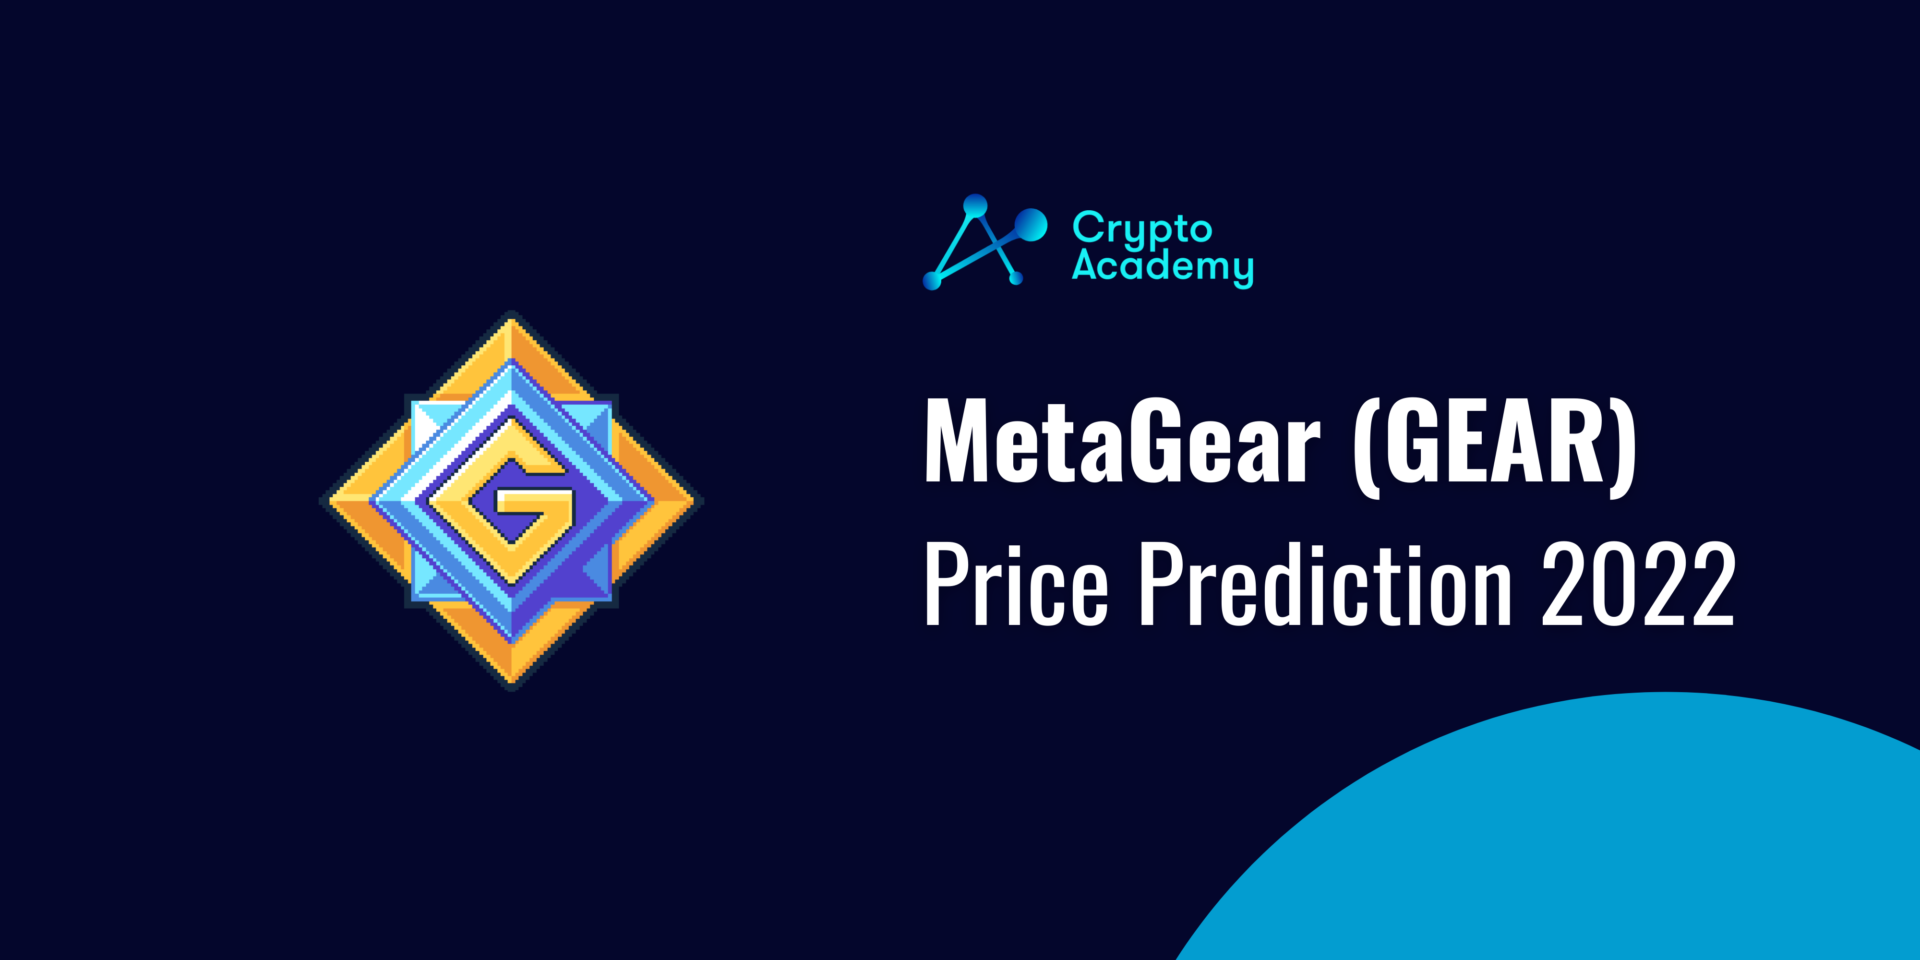 MetaGear Token Price Prediction 2022 and Beyond - Can GEAR Reach $1?